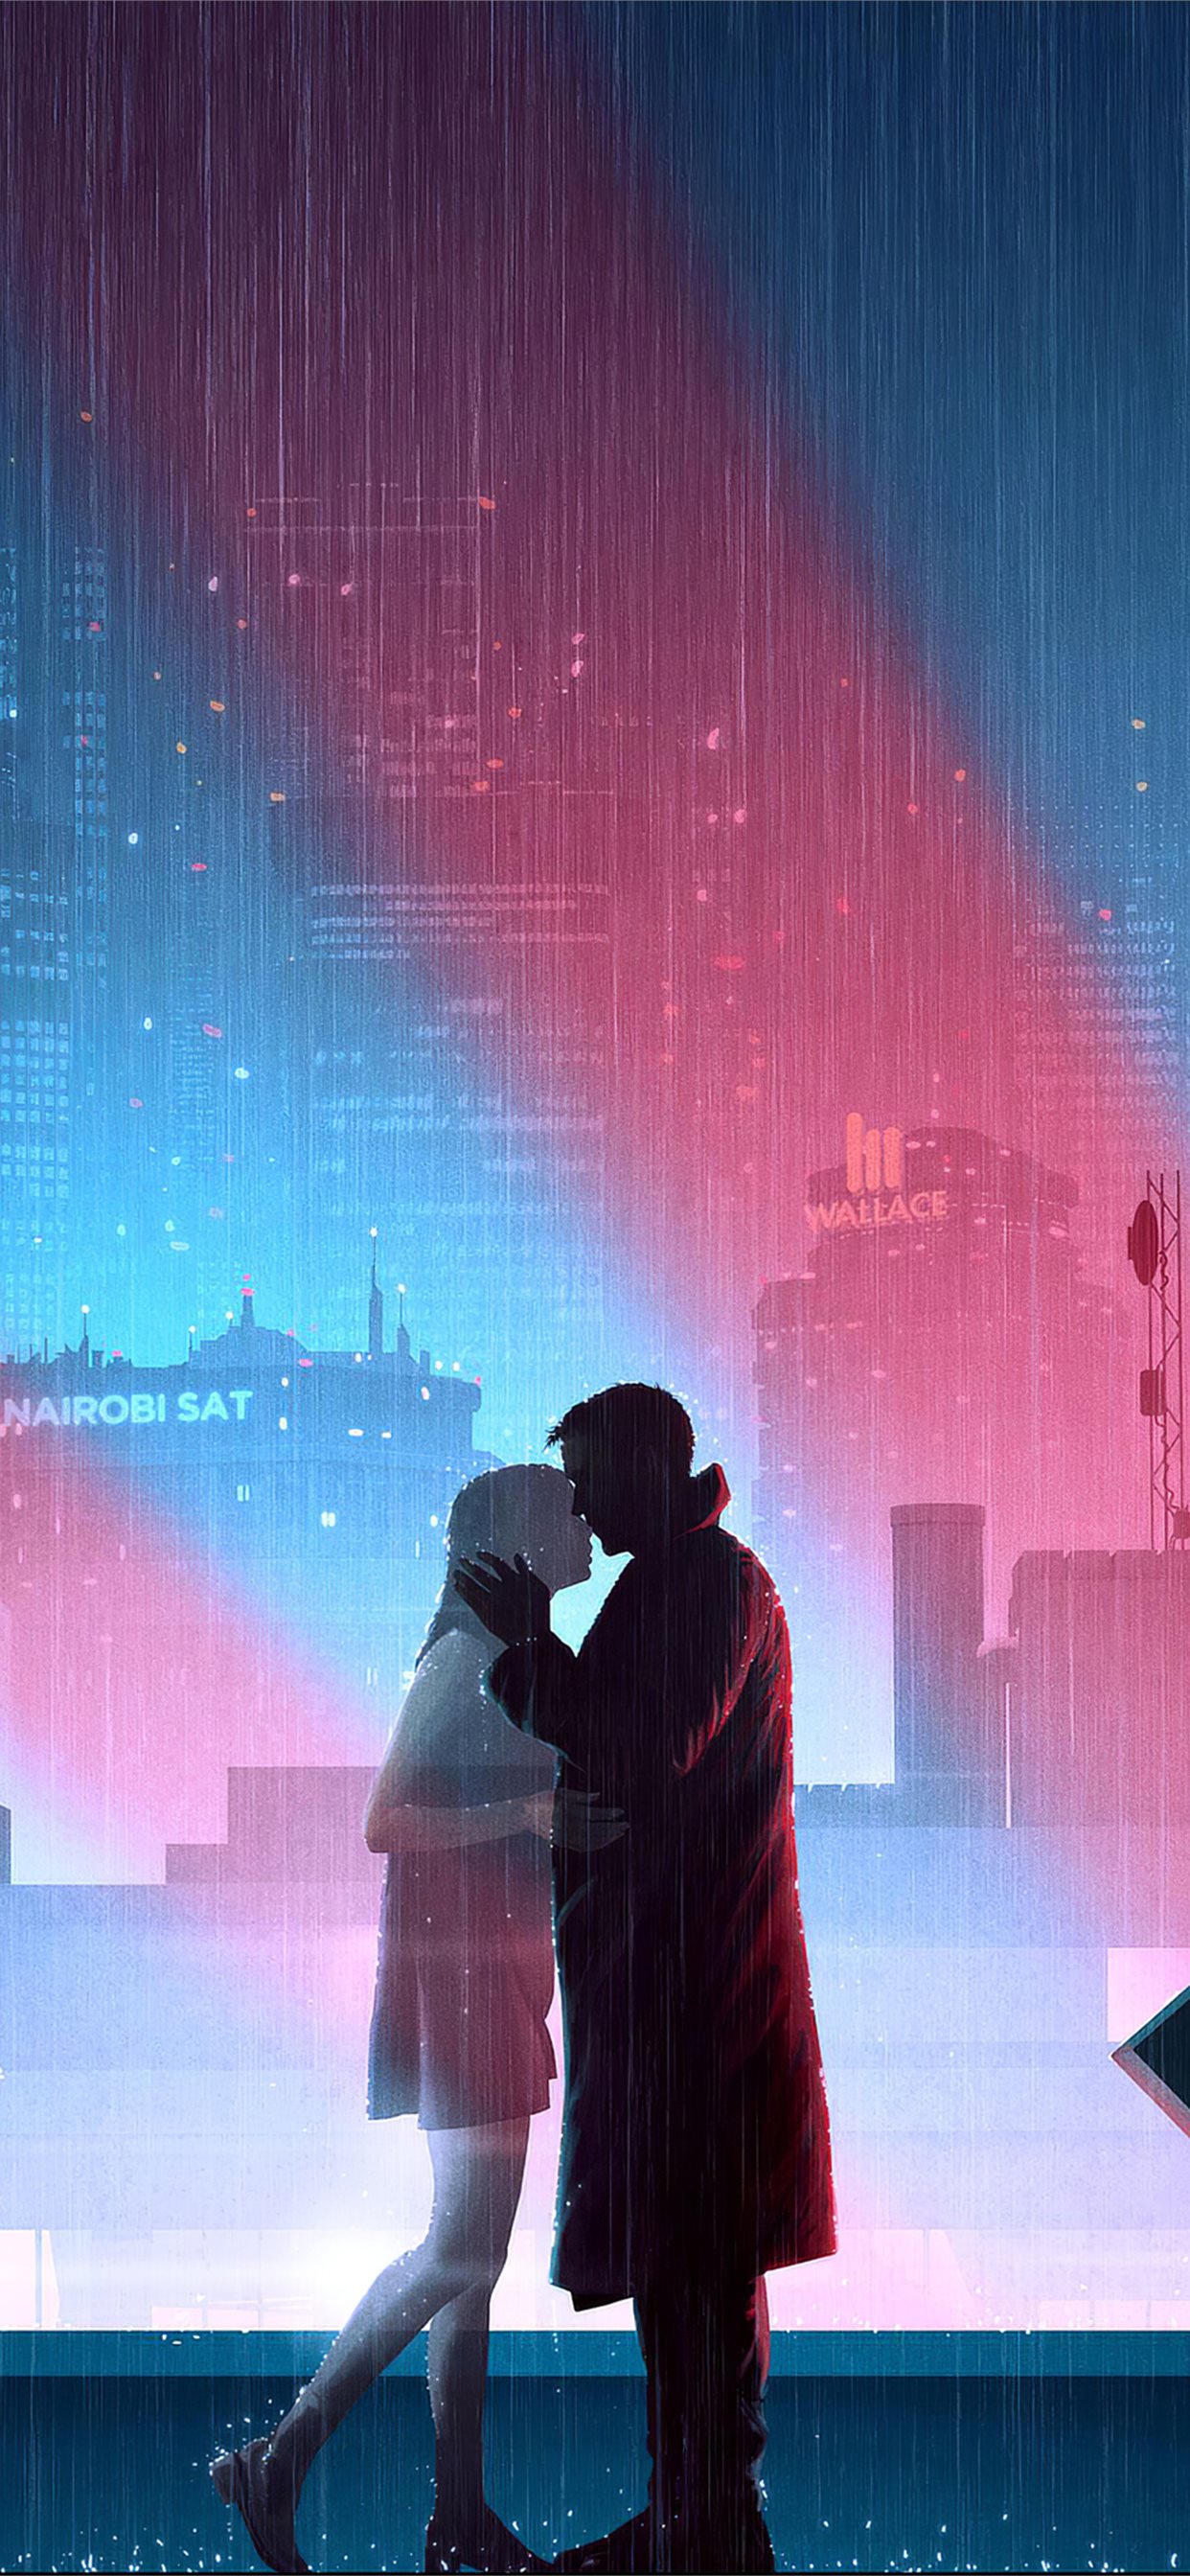 blade runner 2049 love story 4k iPhone X Wallpapers Free Download